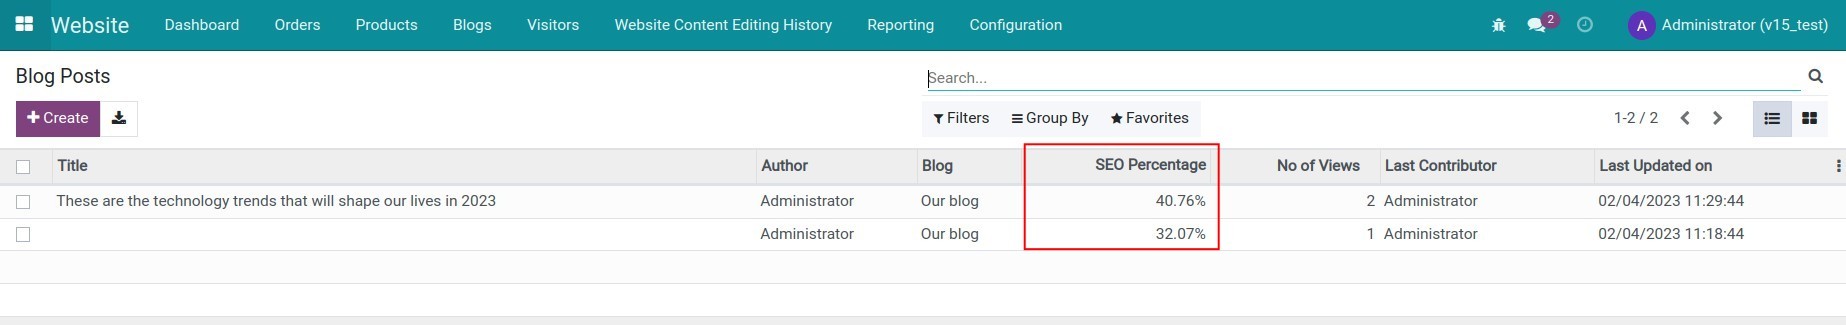 SEO Percentage information added to the Blog Posts view